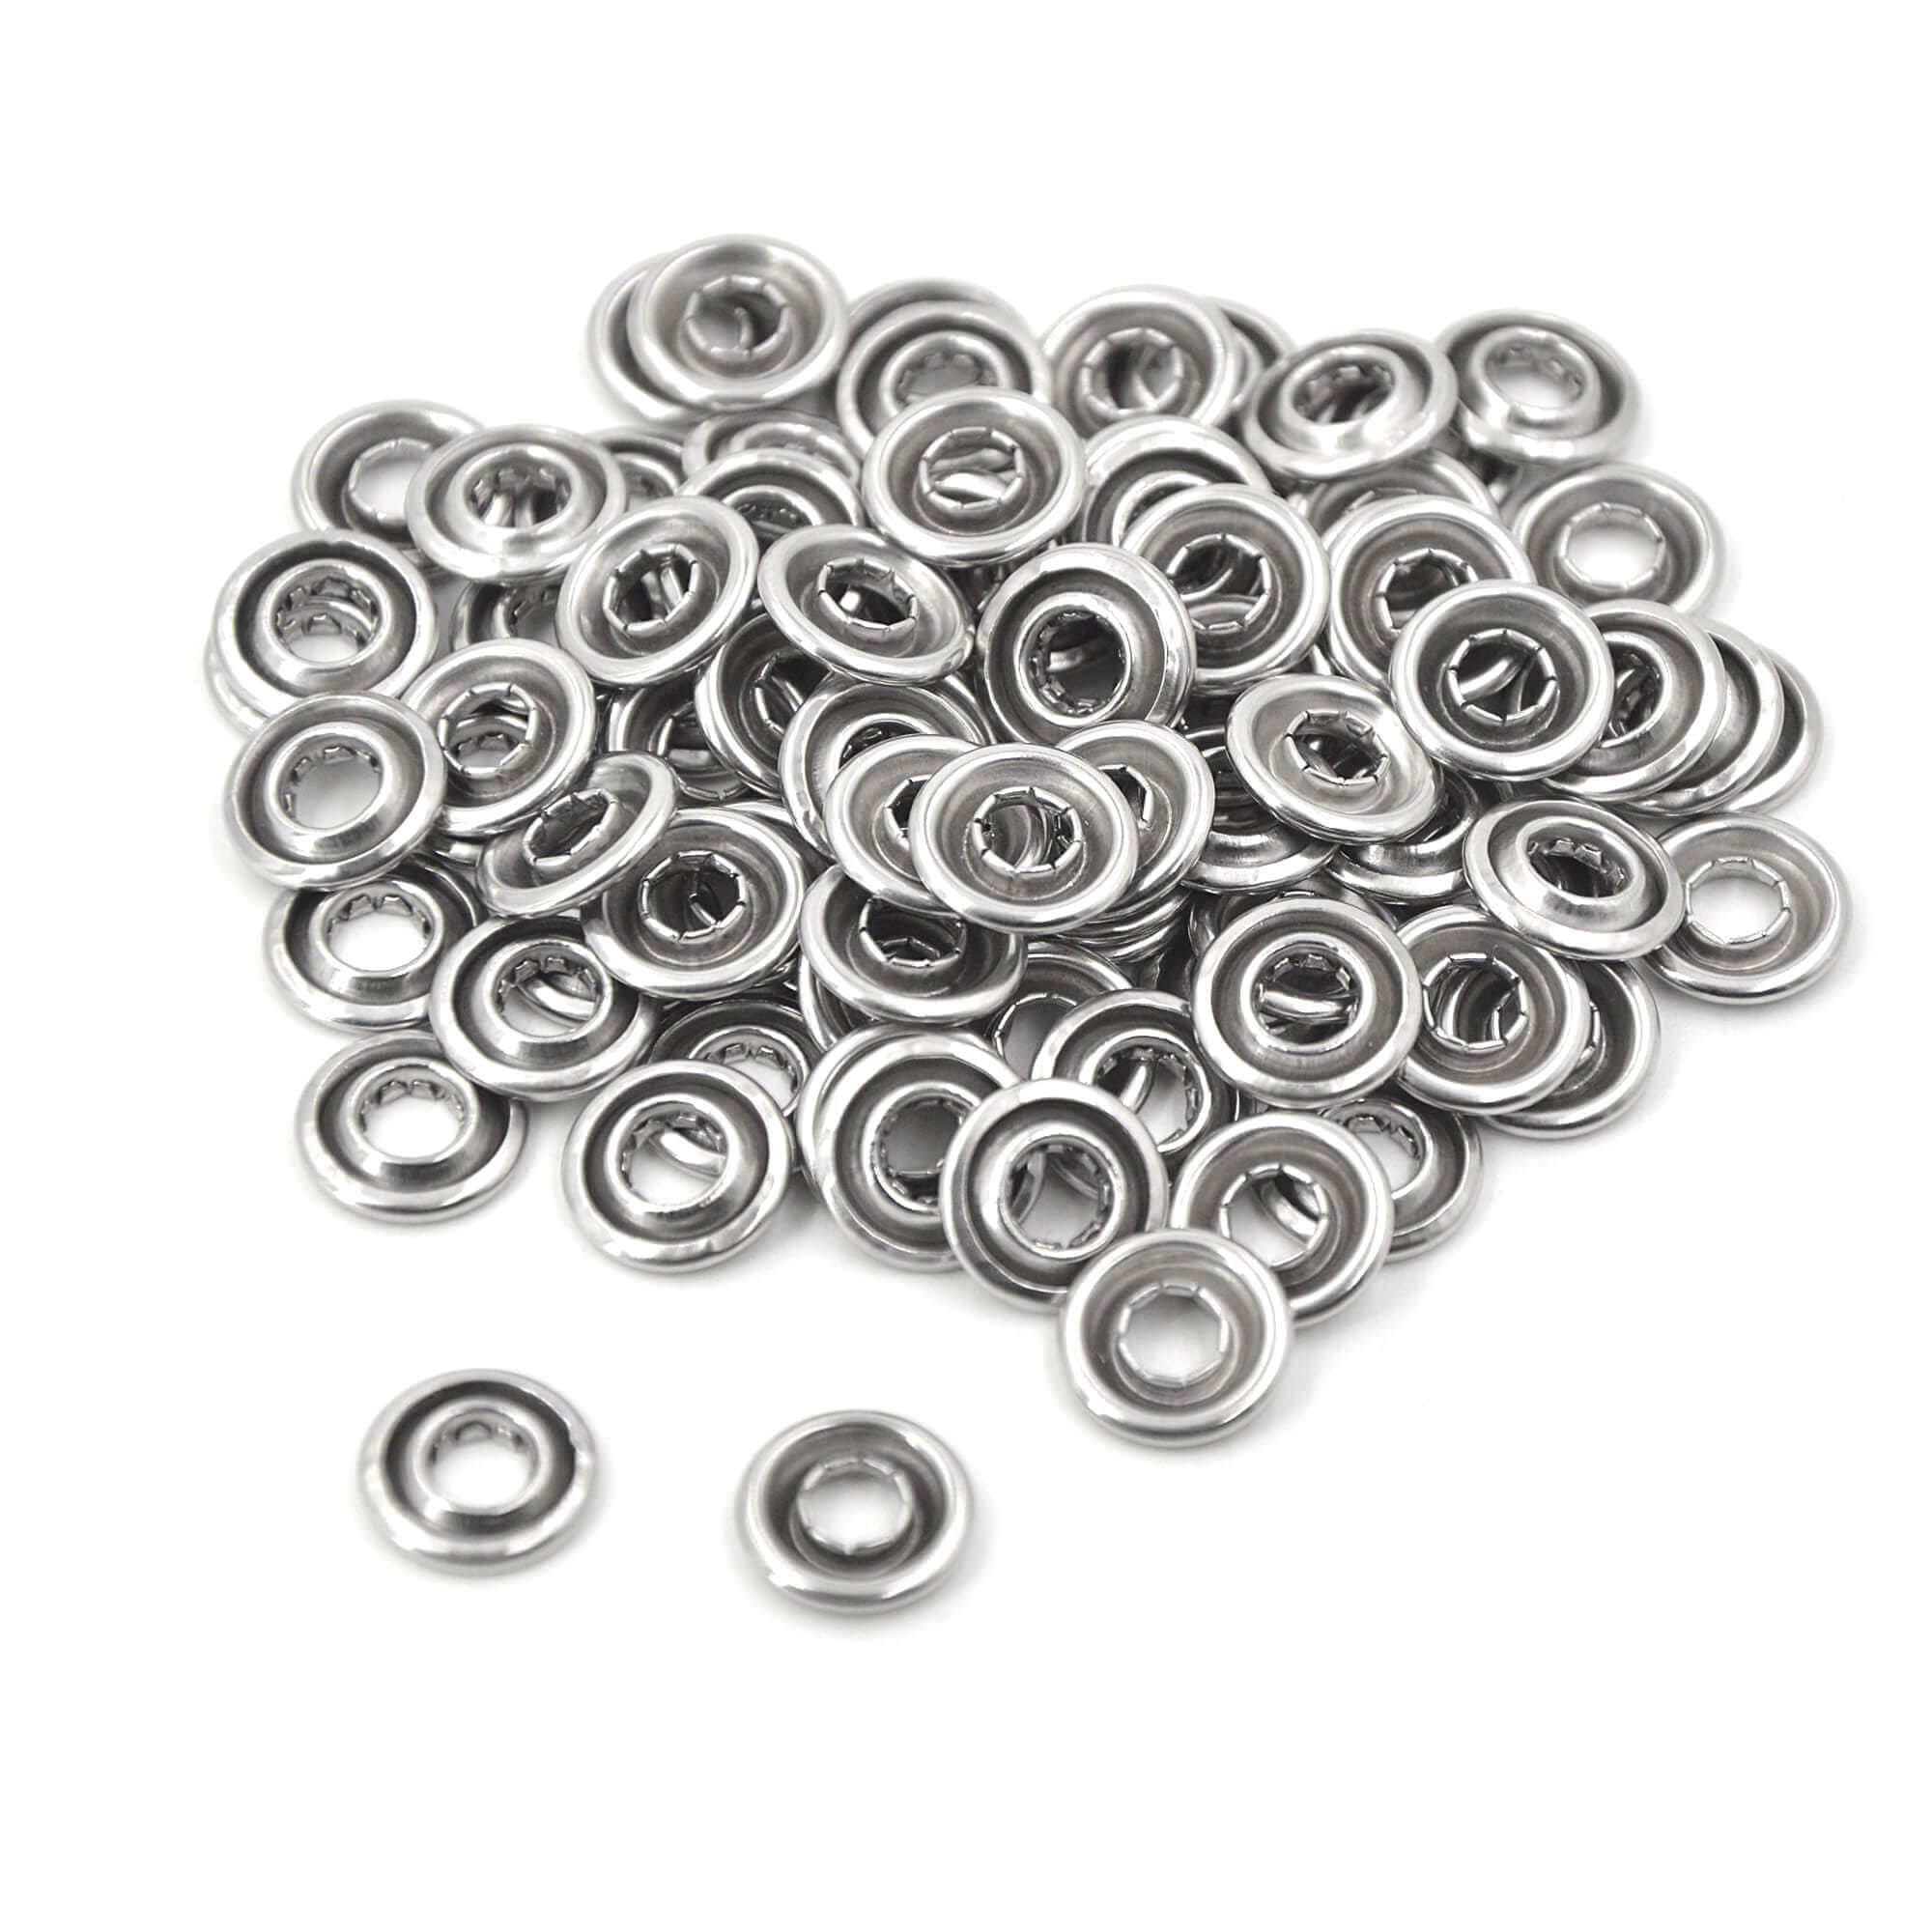 Multi-size Silver Color Prong Ring Snap Fasteners Press Studs - Etsy ...